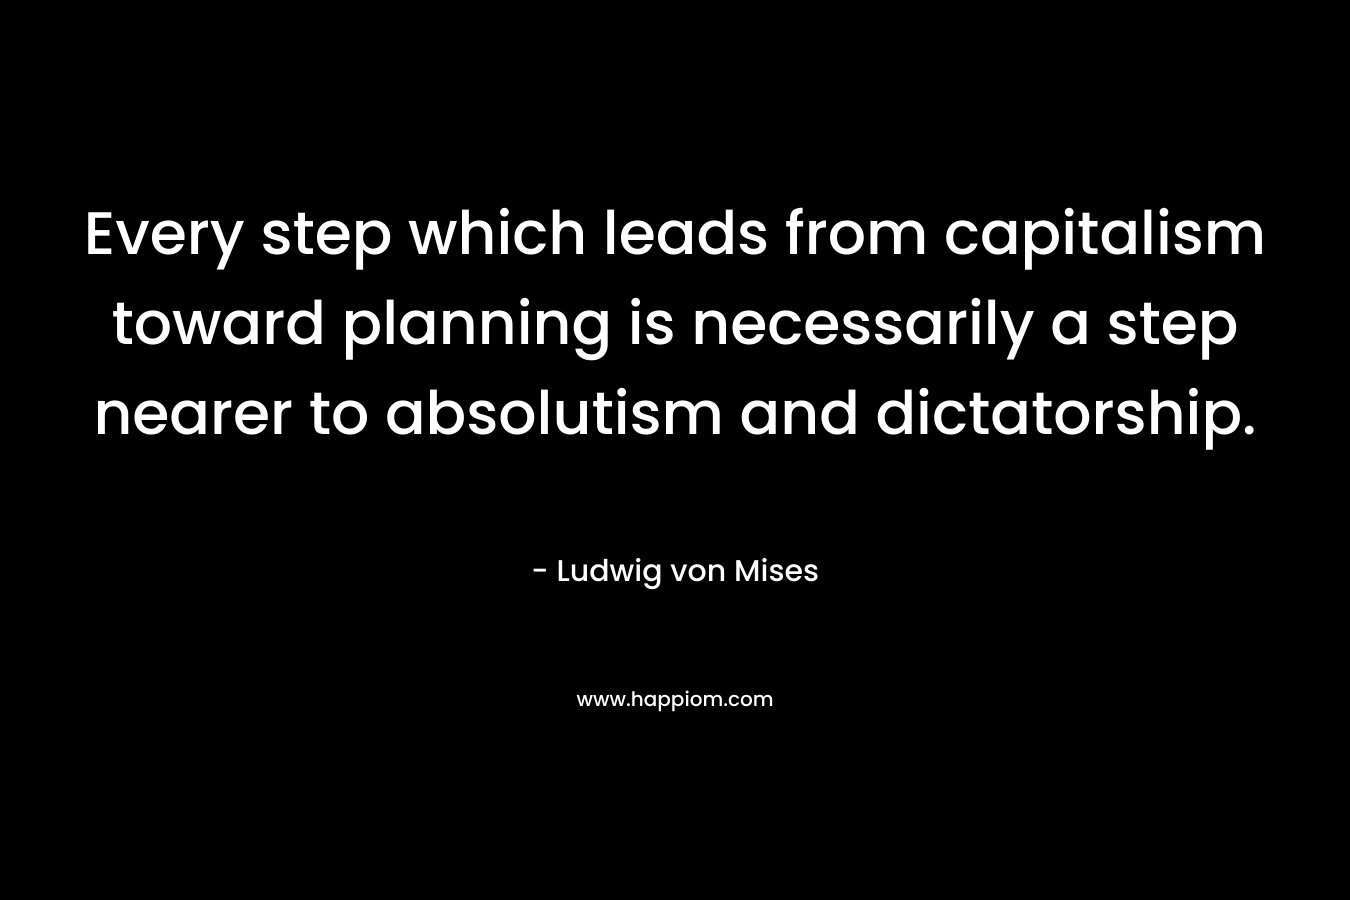 Every step which leads from capitalism toward planning is necessarily a step nearer to absolutism and dictatorship. – Ludwig von Mises